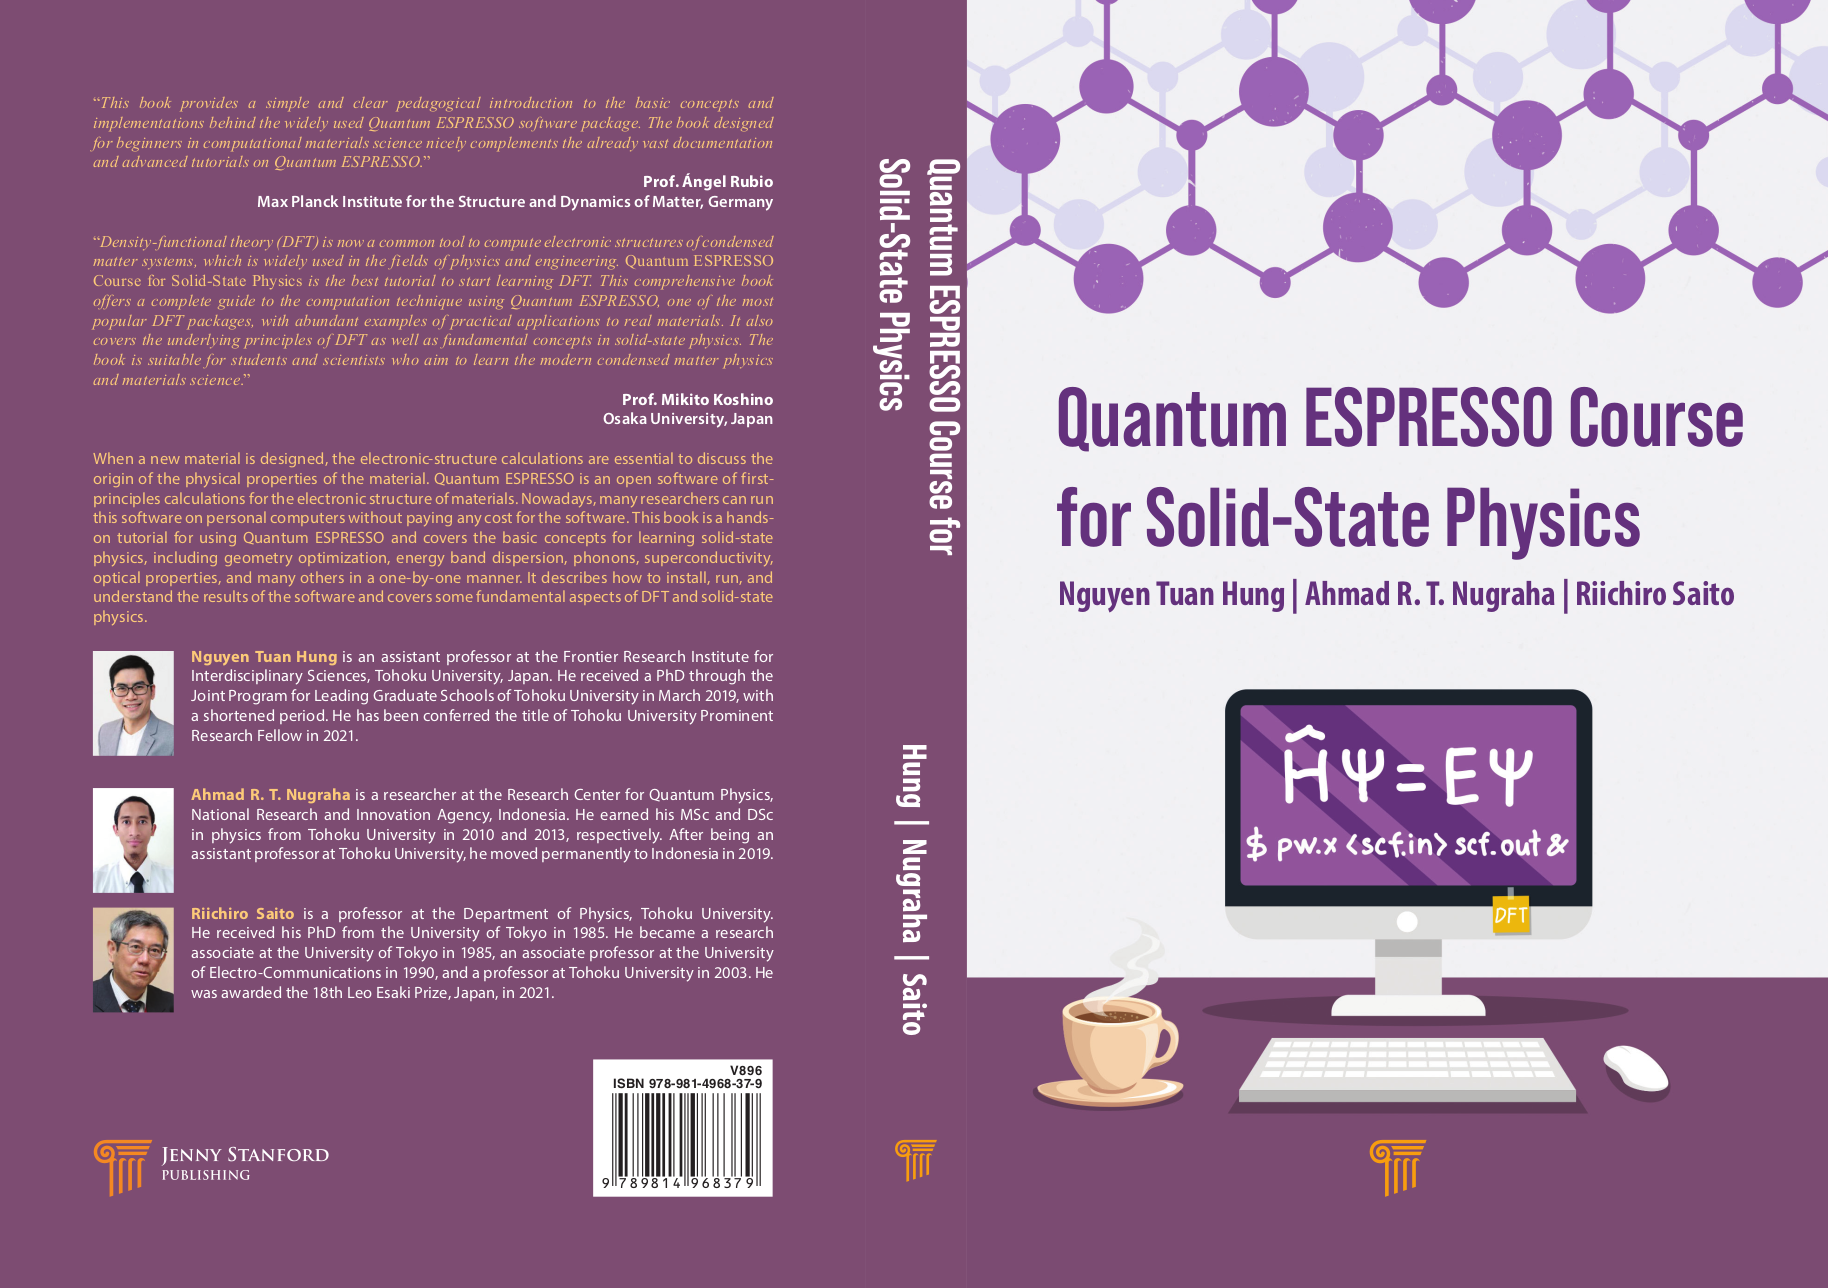 An easy book to learn Quantum ESPRESSO for solid-state physics